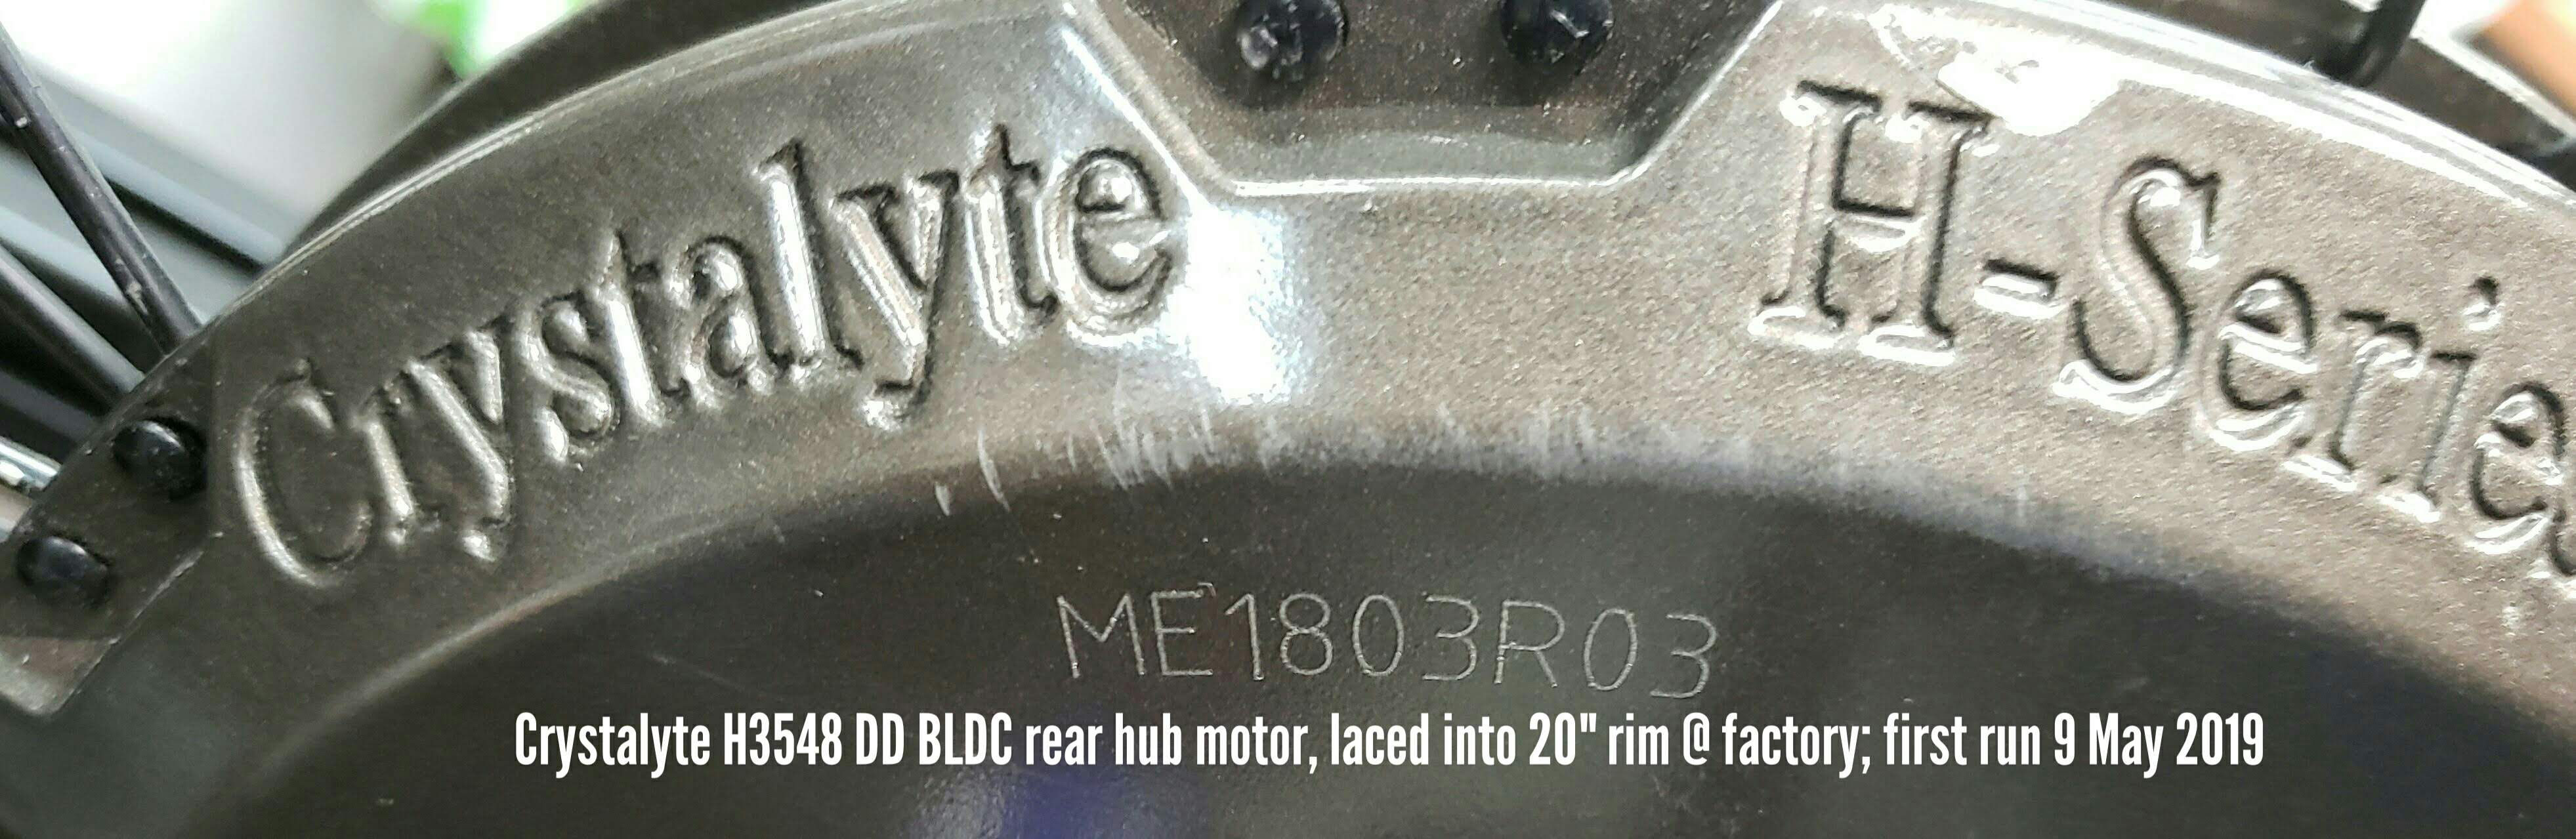 photo of Crystalyte H3548 rear hubmotor's model and serial number